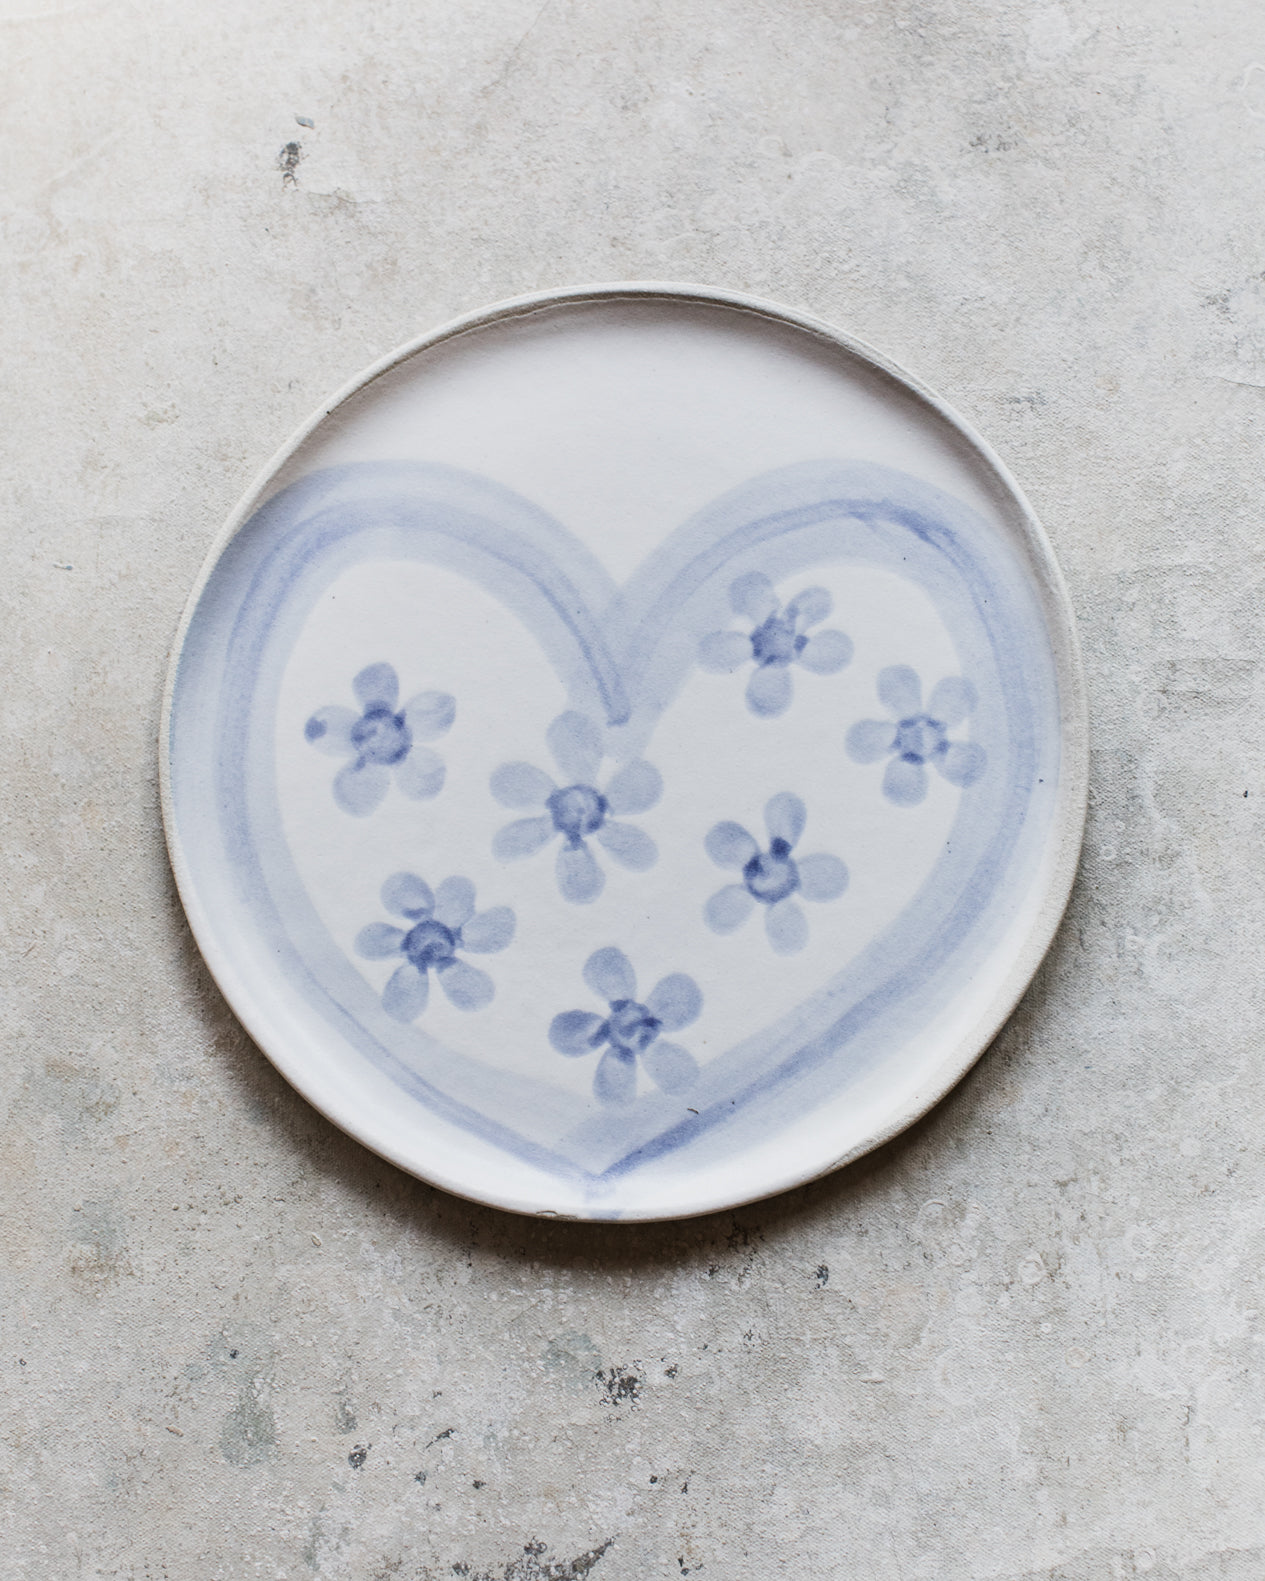 Handmade ceramic dinner/serving plate heart shaped decoration by clay beehive ceramics